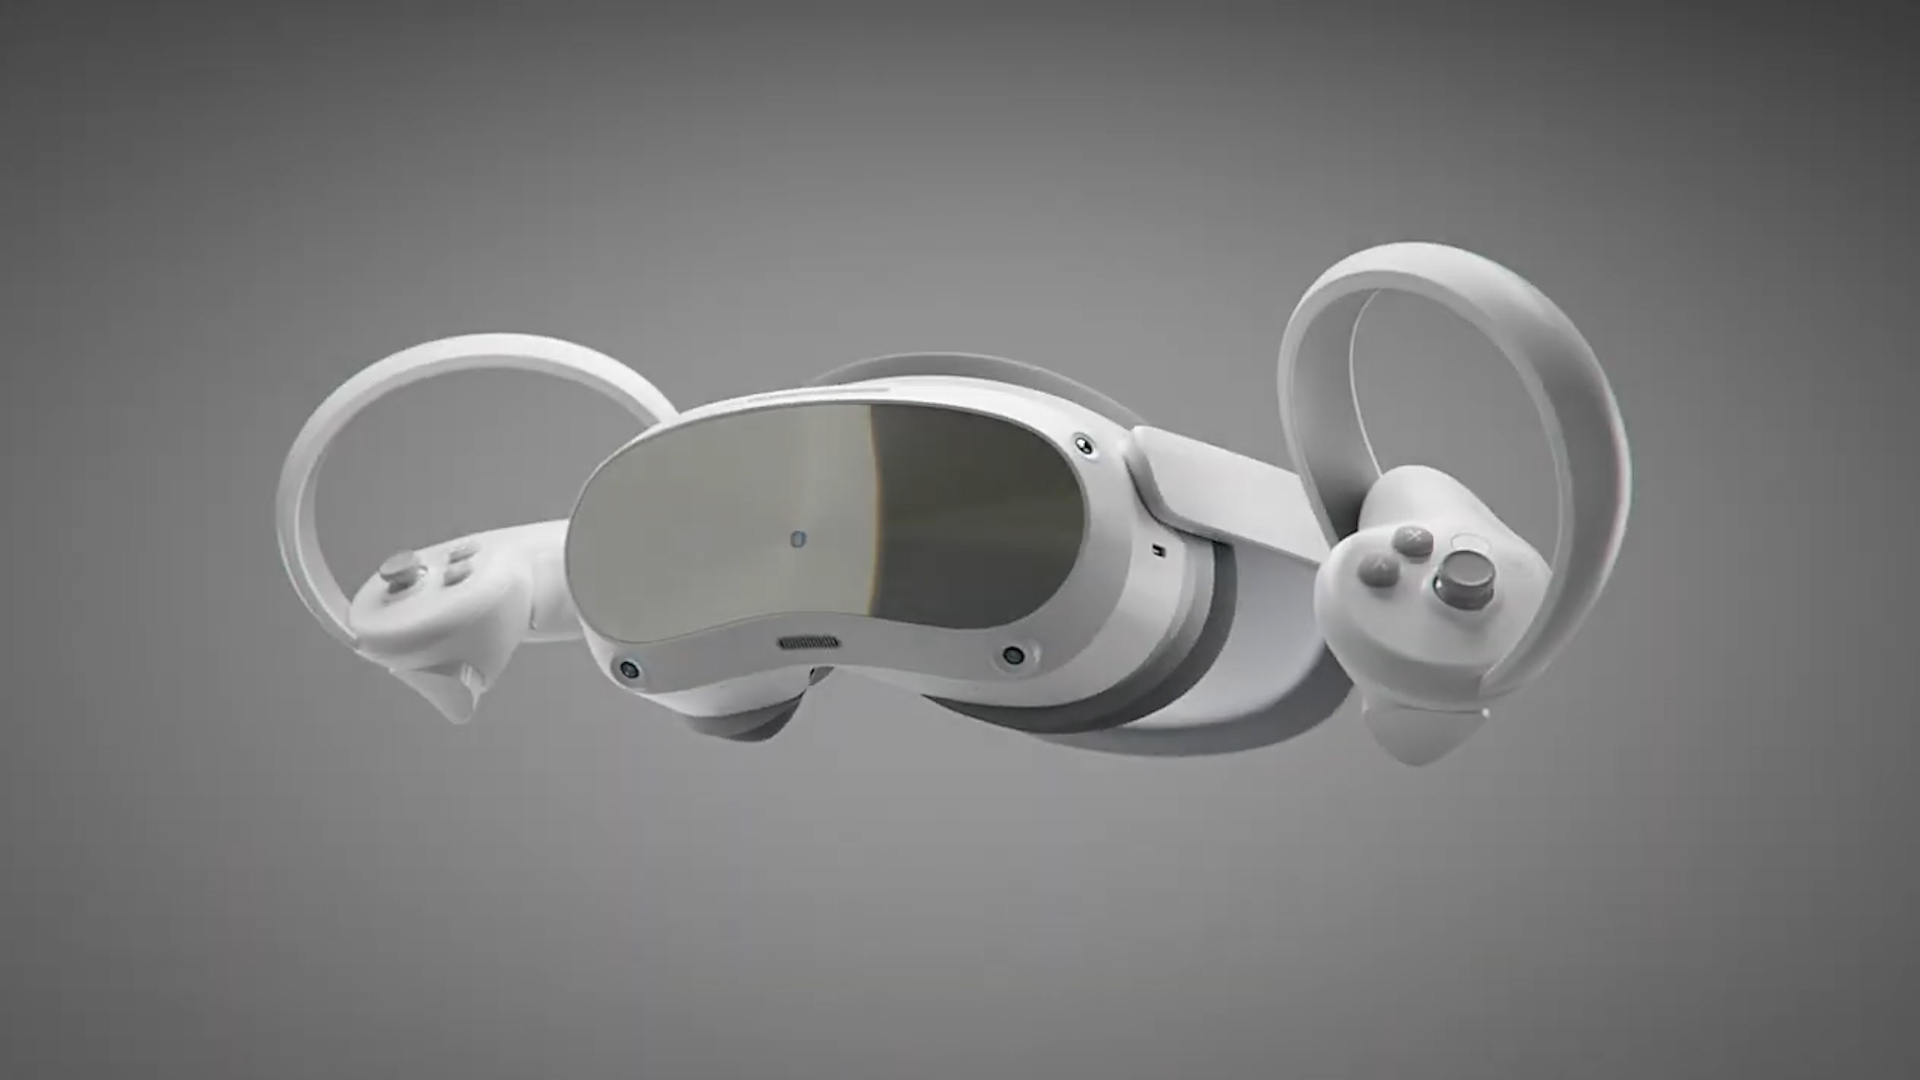 Pico 4 Enterprise All-In-One VR Headset Announced - VRScout